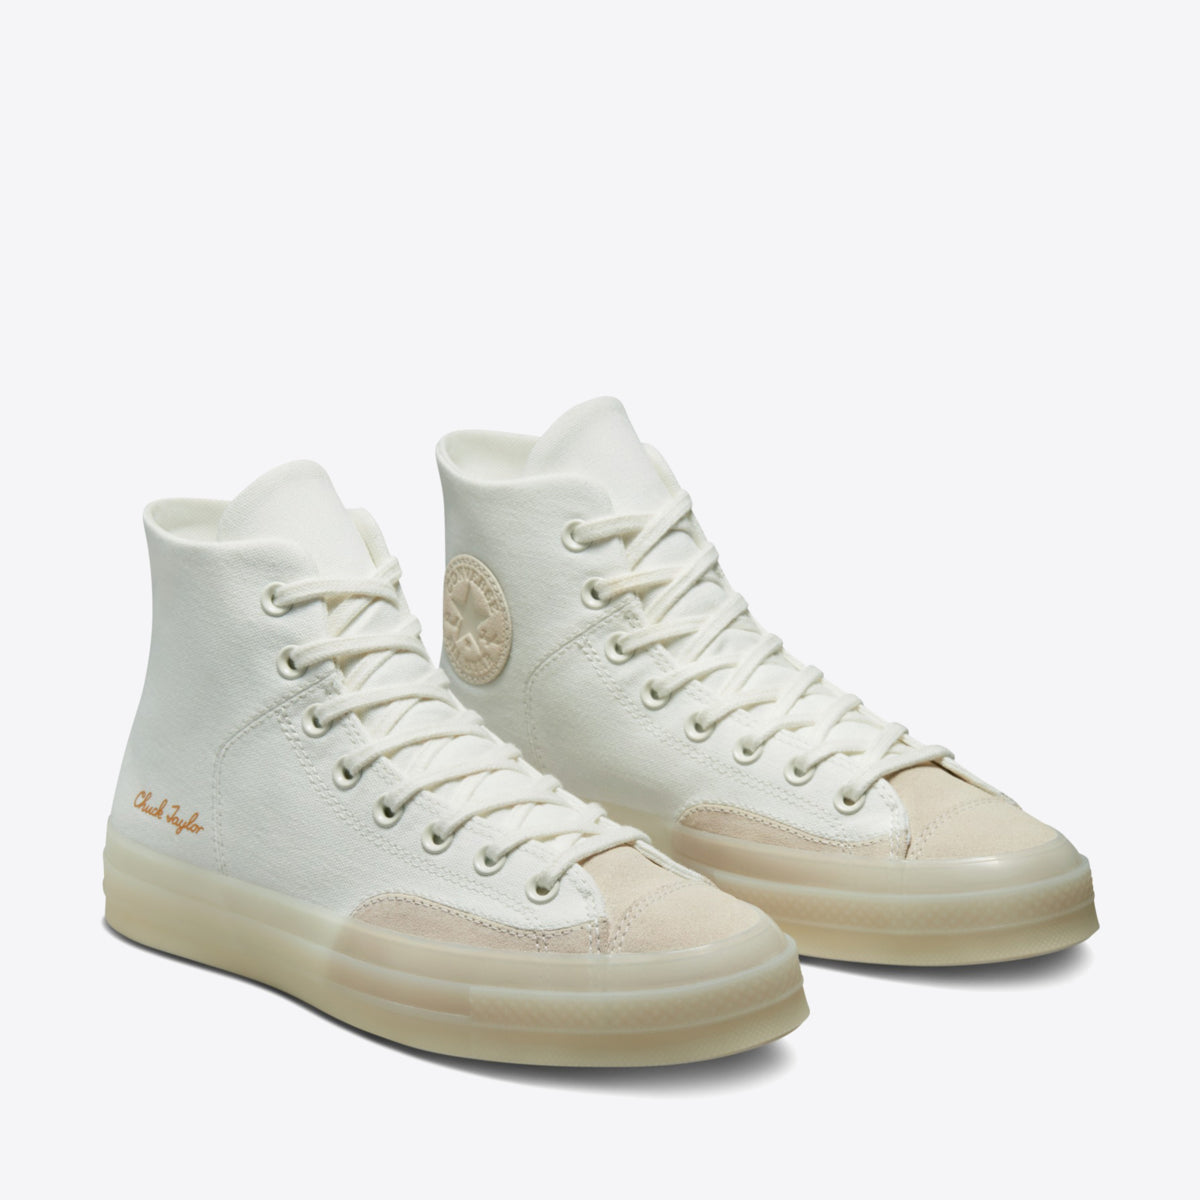 CONVERSE Chuck Taylor 70 Marquis High Vintage White - Image 5